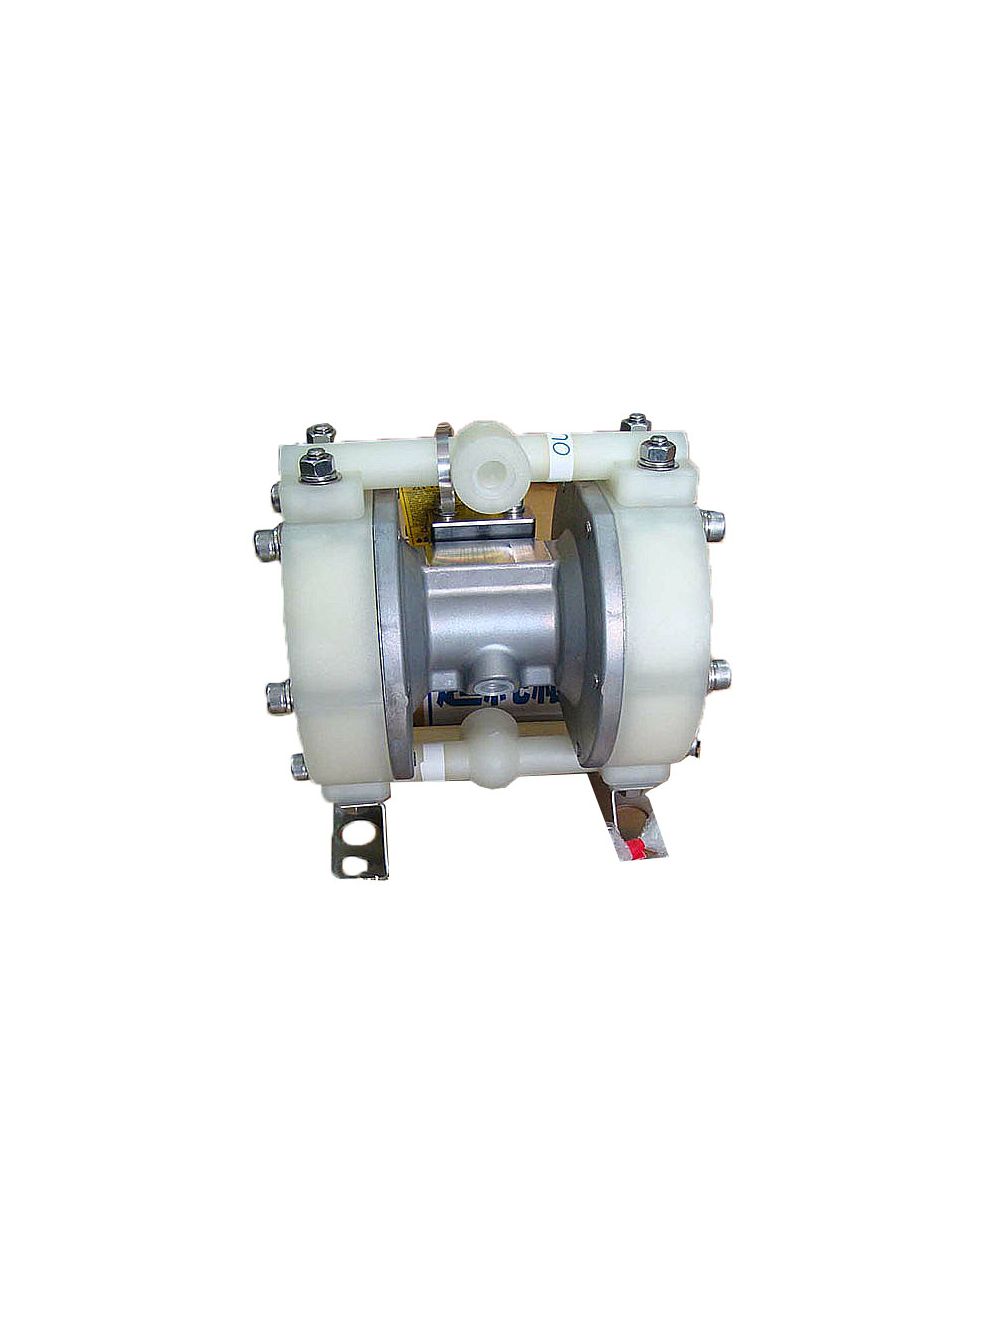 New In stock for sale, yamada Diaphragm Pump DP-10BPT 